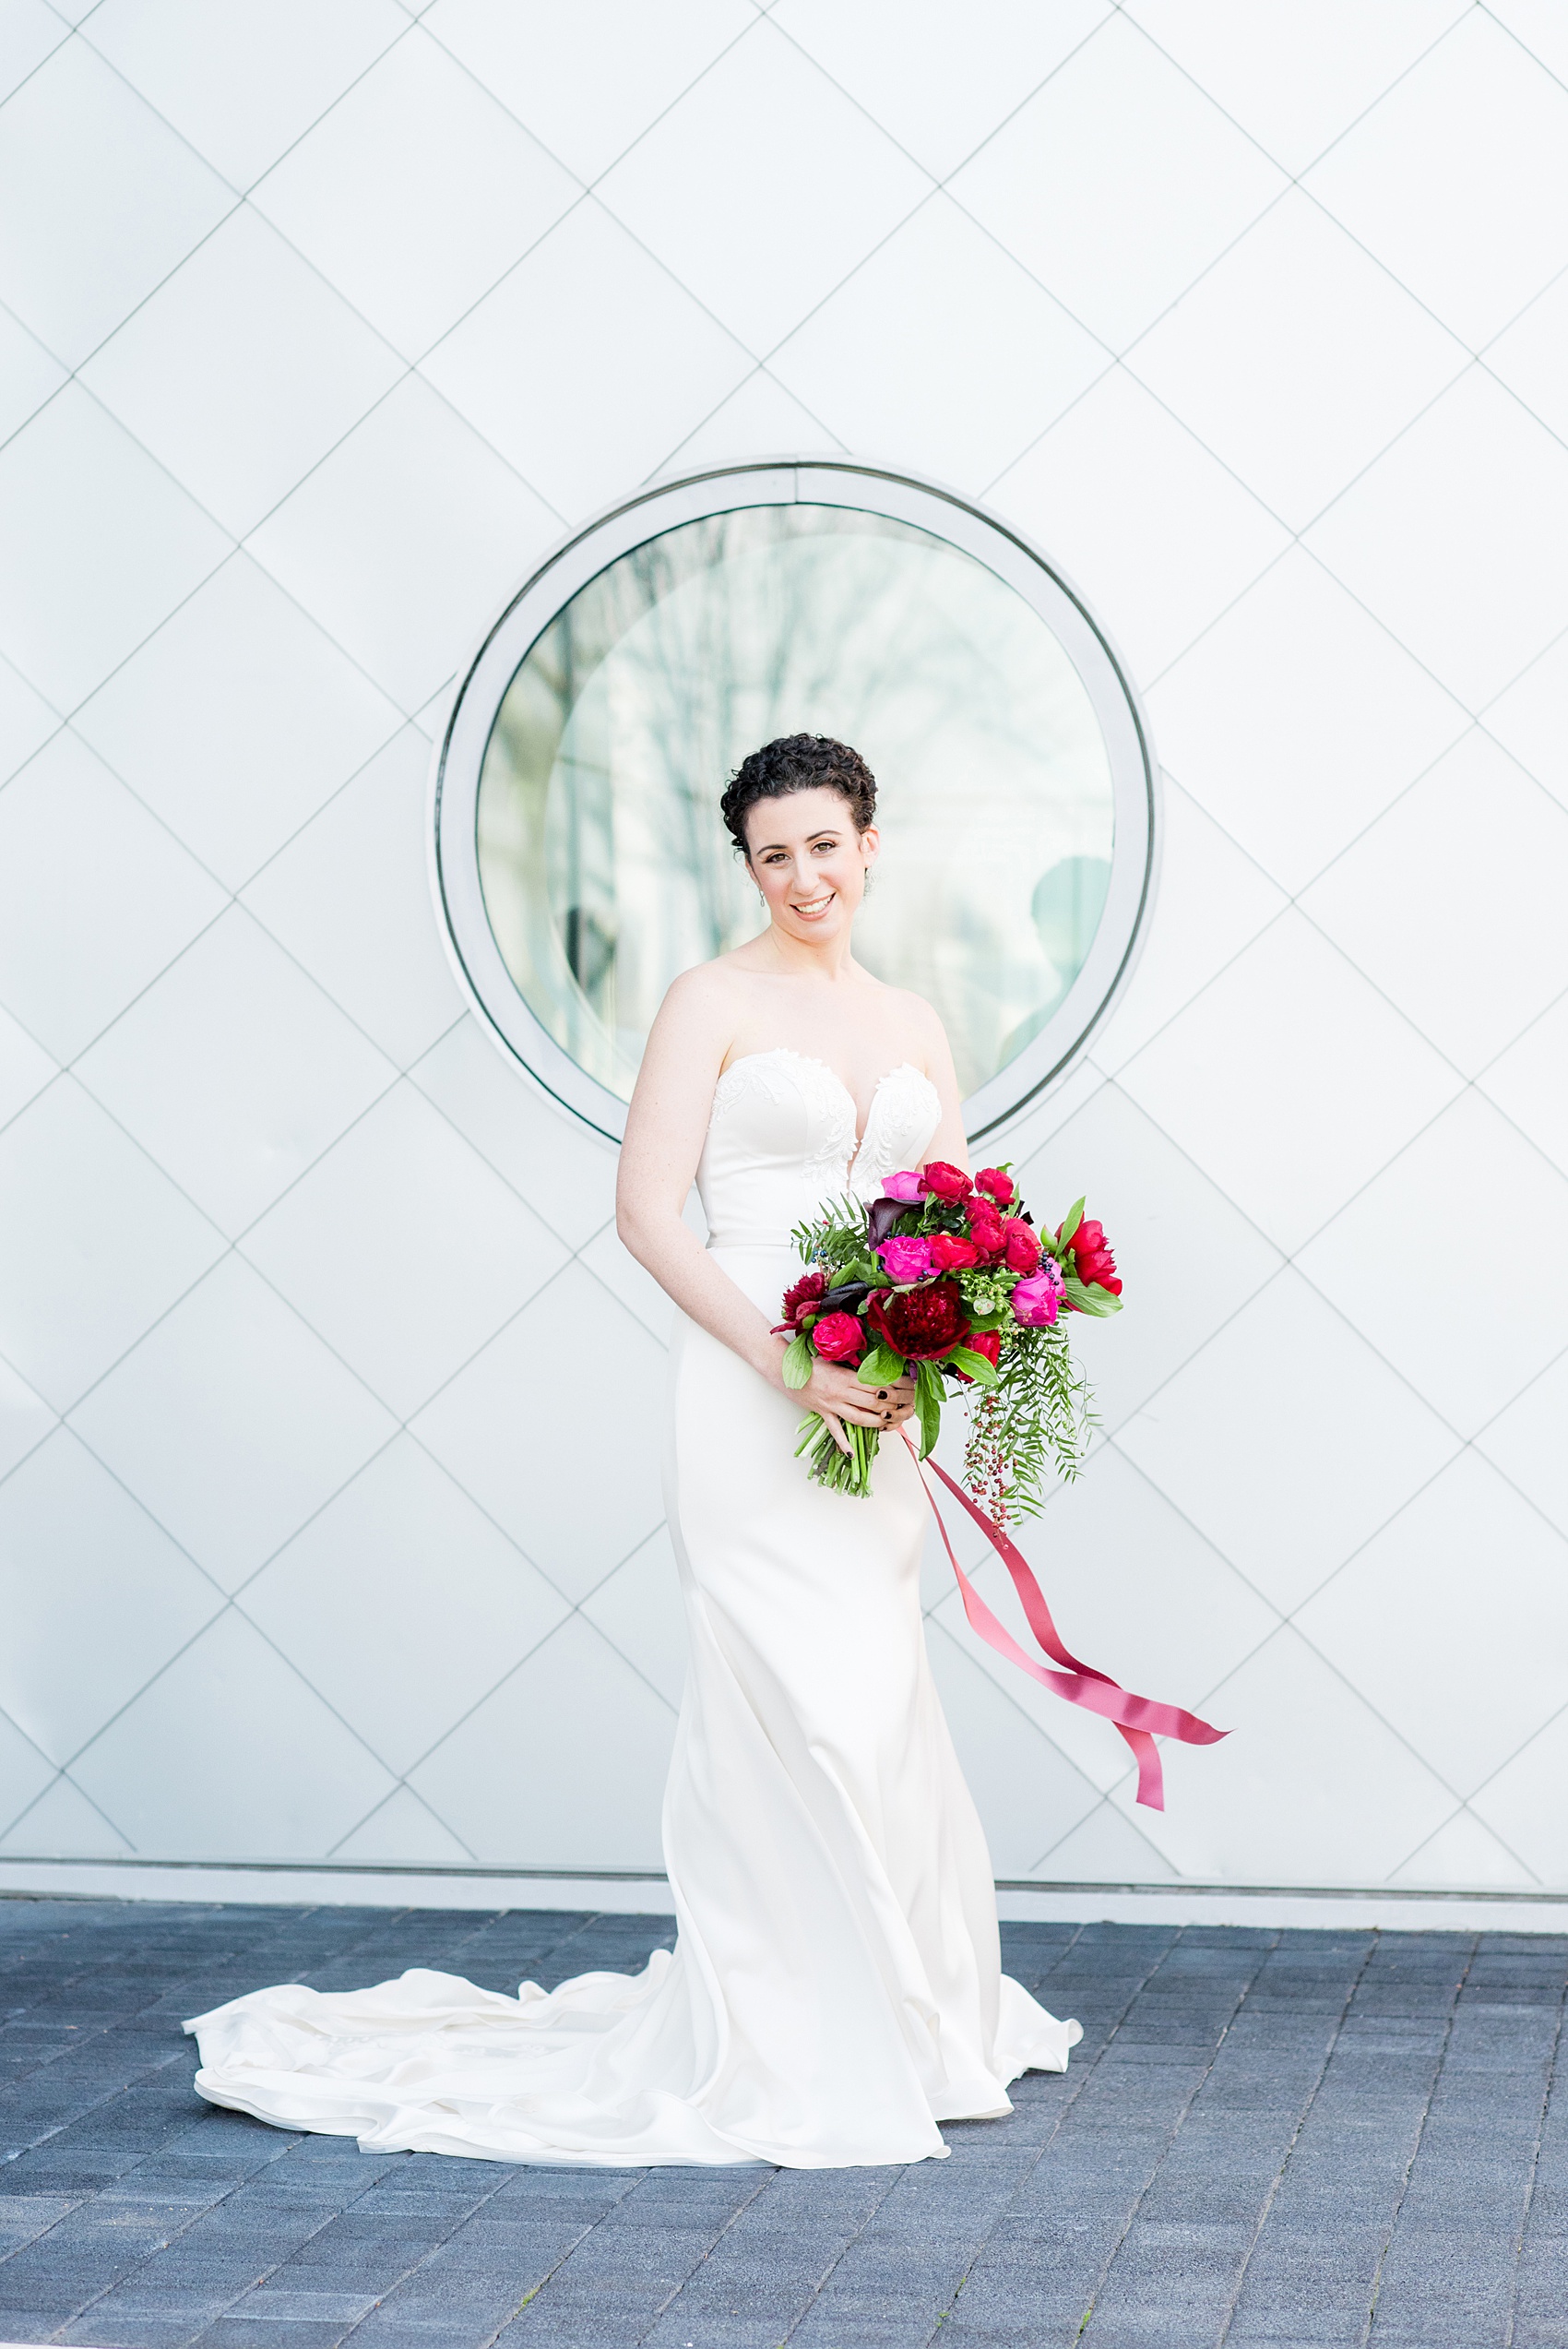 W Hoboken wedding photos by Mikkel Paige Photography. Picture of the bride in her strapless Paloma Blanca gown in this well known New Jersey city with a view of the NYC skyline across the Hudson River. #mikkelpaige #HobokenWedding #NewJerseyPhotographer #NewYorkCityPhotographer #NYCweddingphotographer #brideandgroomphotos #redpeonies #romanticwedding #springwedding #CityWedding